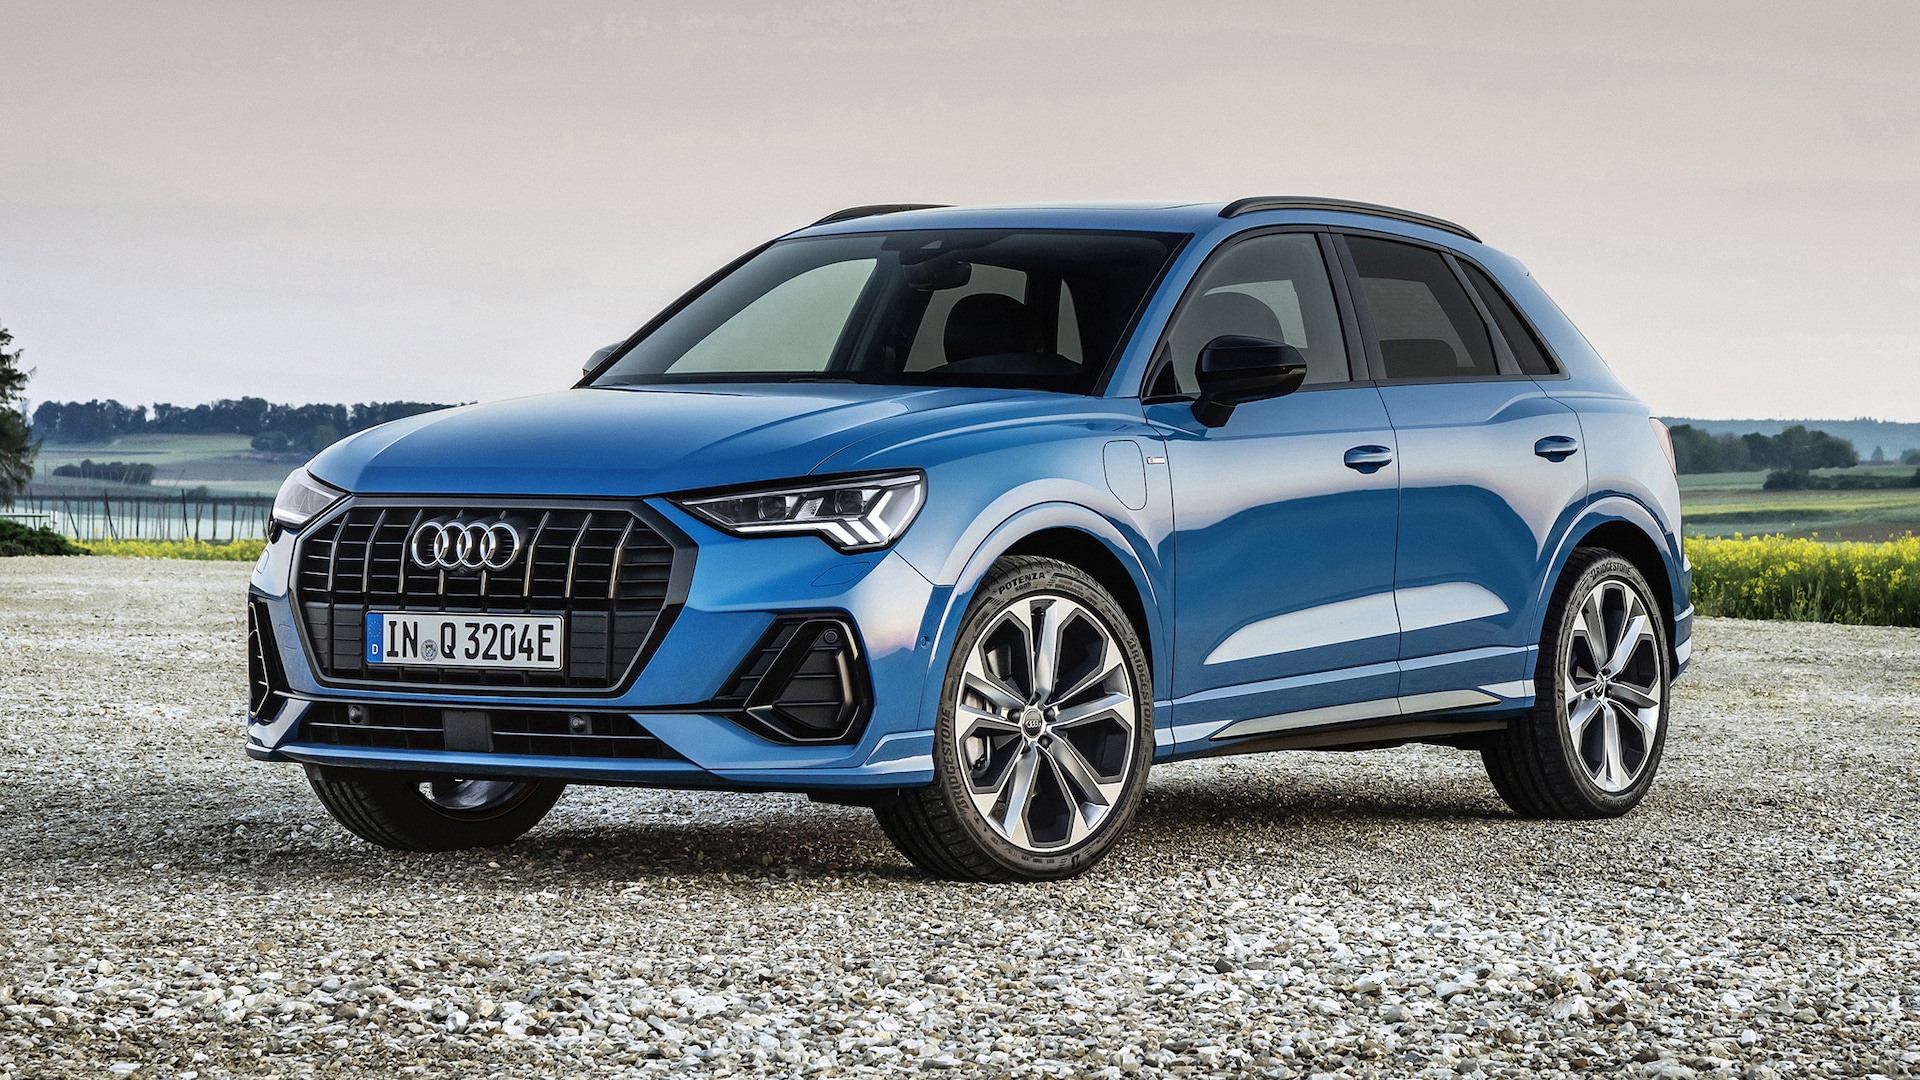 2022 Audi Q3 Prices, Reviews, and Photos - MotorTrend